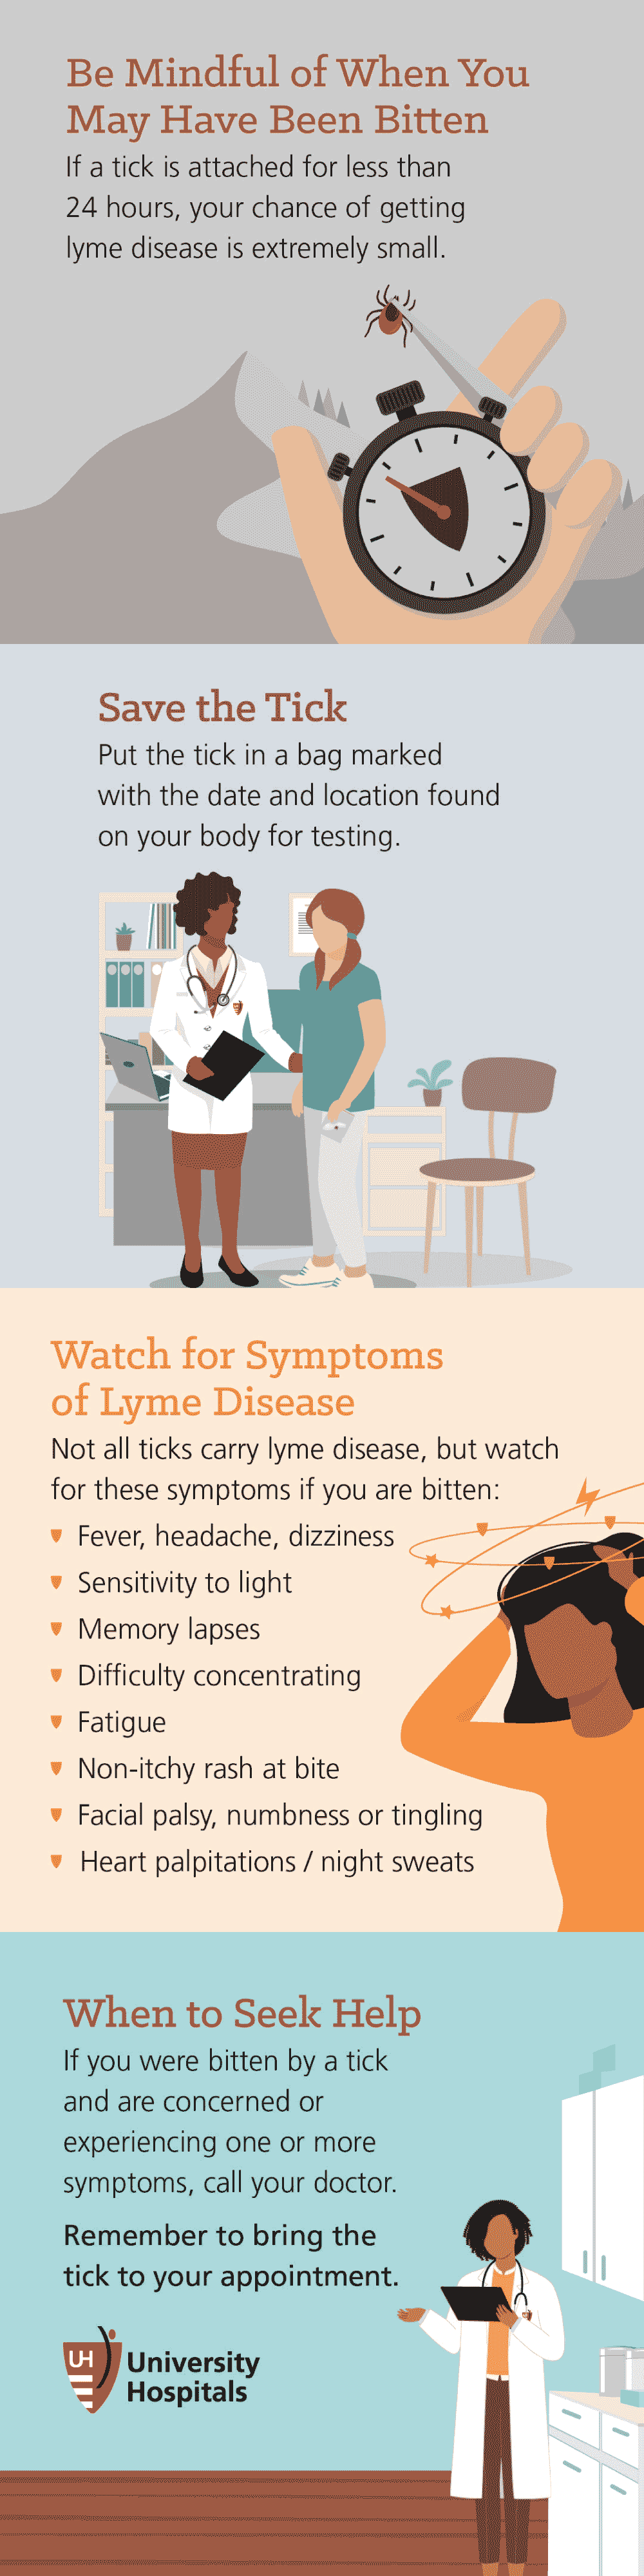 Infographic: 8 Tips to Prevent Lyme Disease: be mindful of when you may have been bitten, save the tick, watch for symptoms of Lyme disease, when to seek help